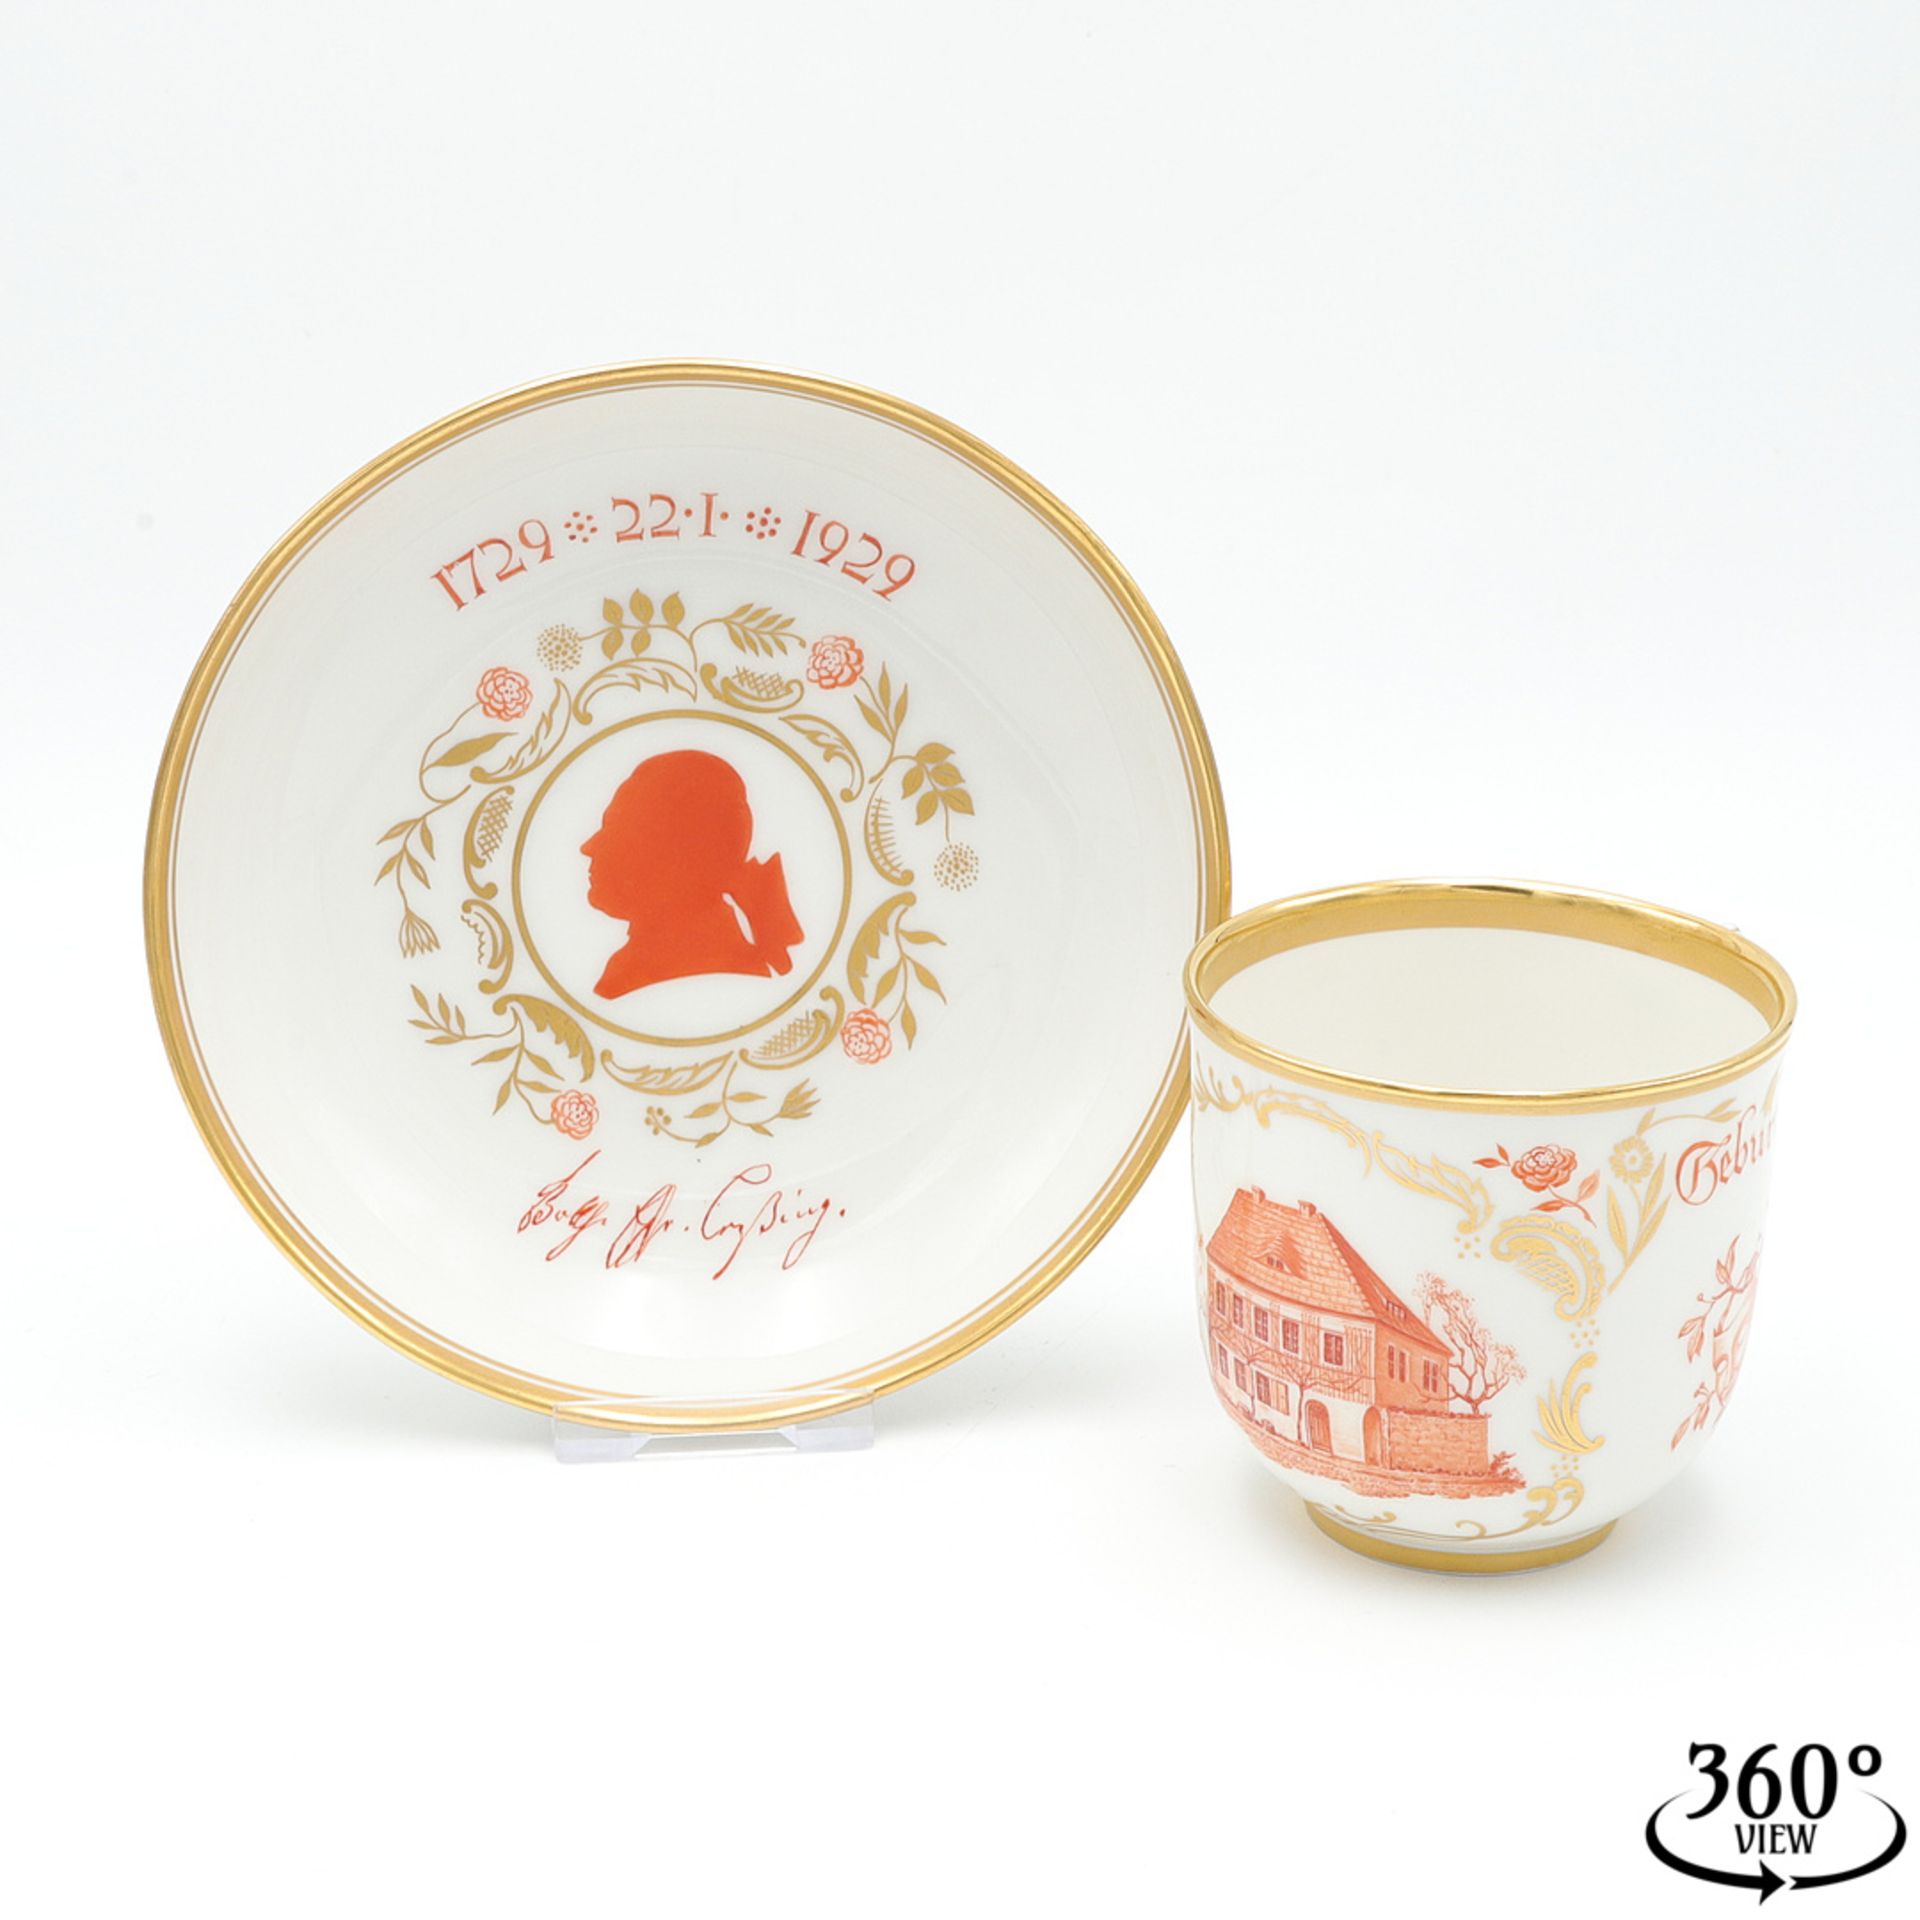 KPM Berlin commemorative cup and saucer Gotthold E. Lessing